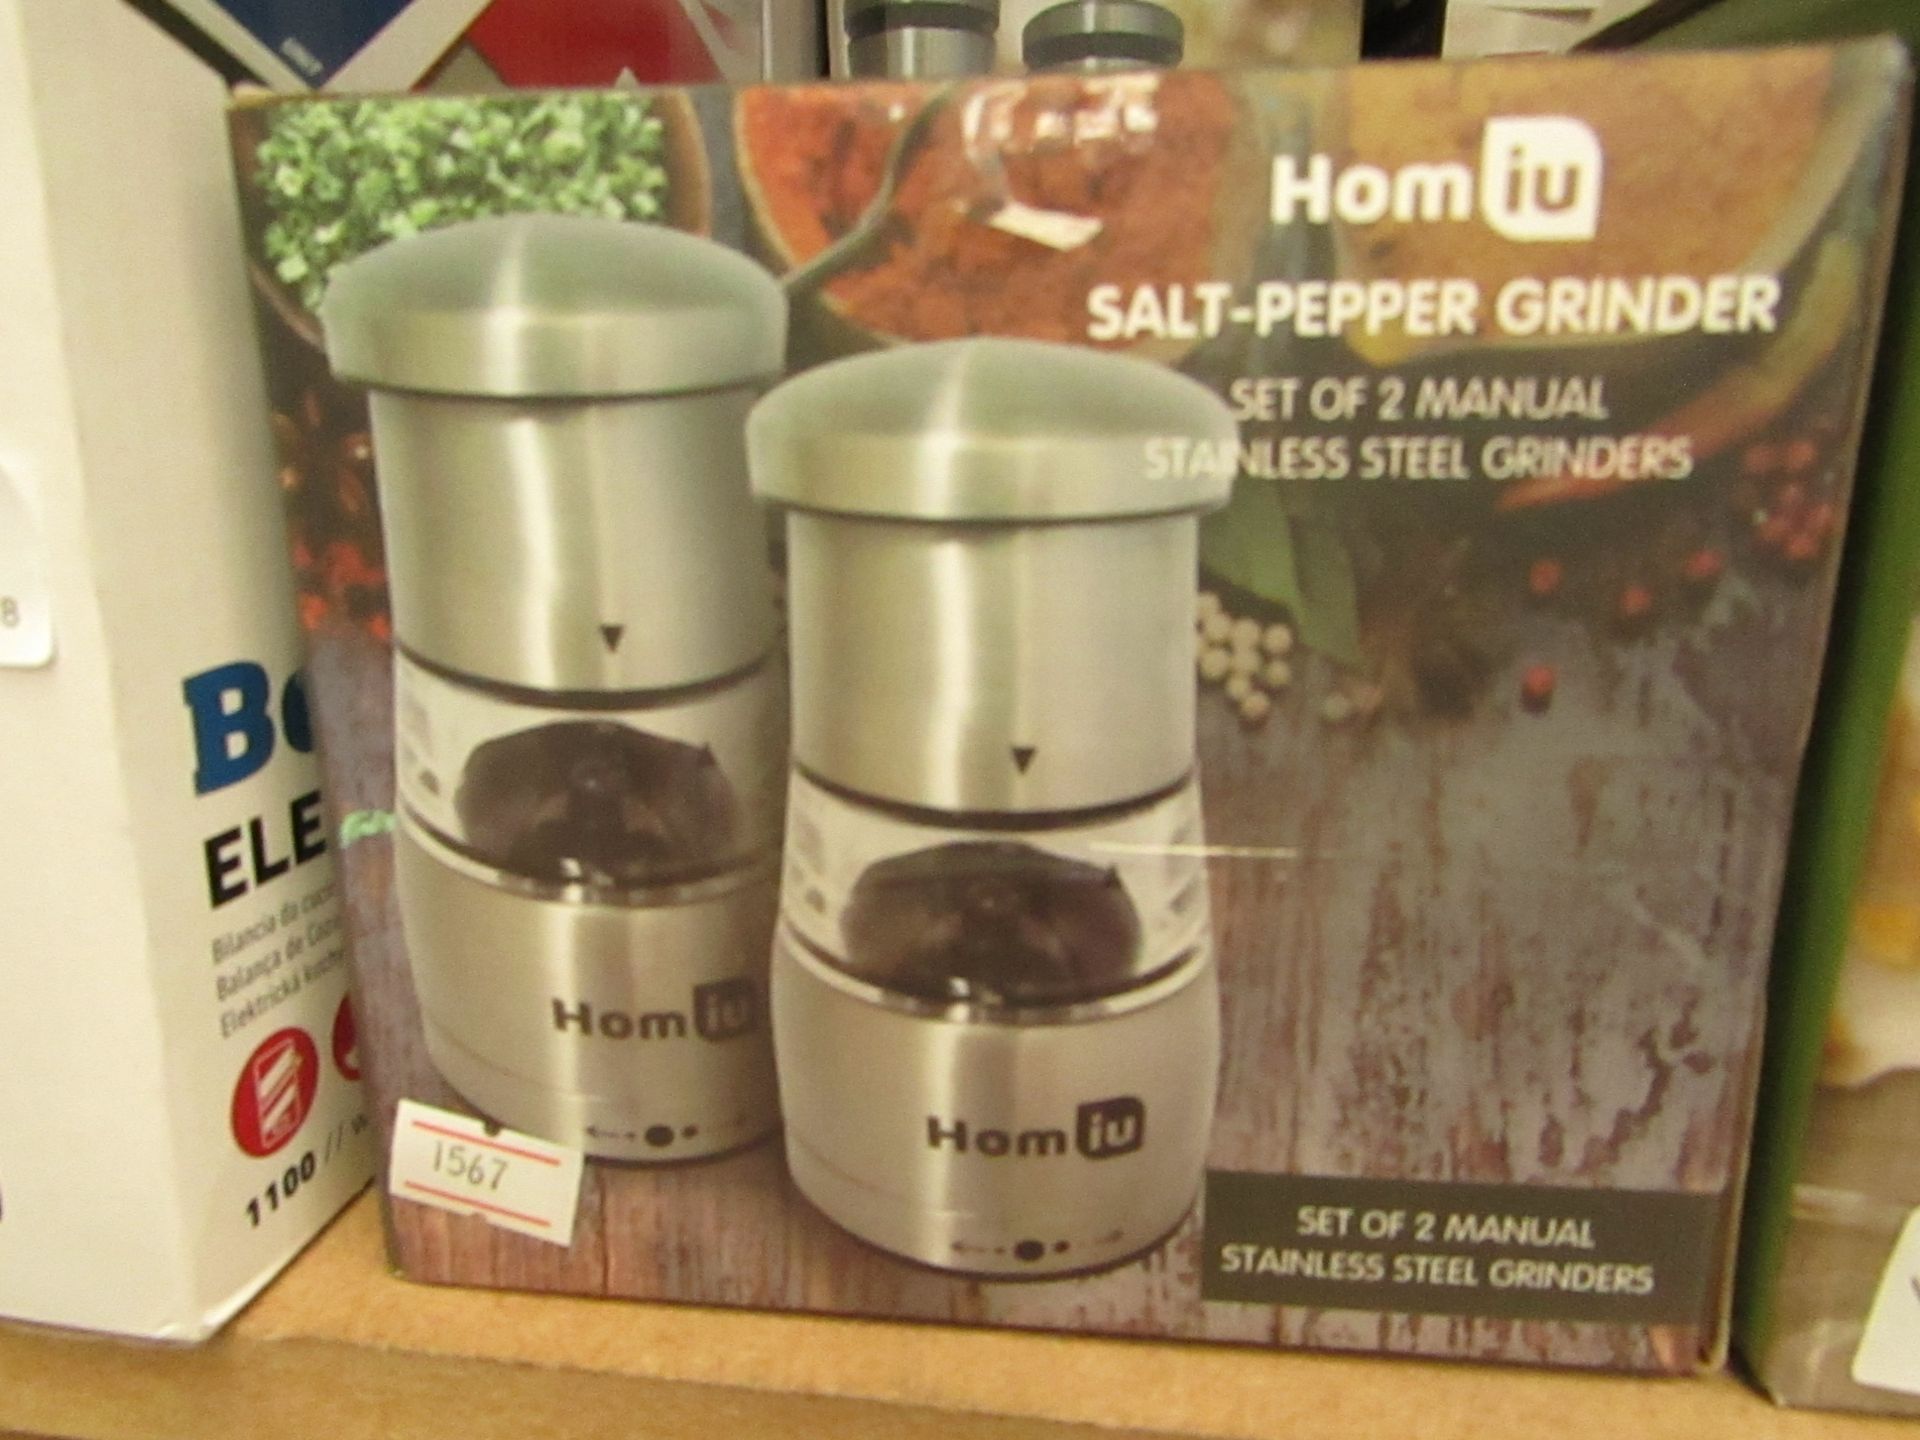 Homiu salt-pepper grinder set of 2 manual stainless steel grinders, unchecked and boxed.